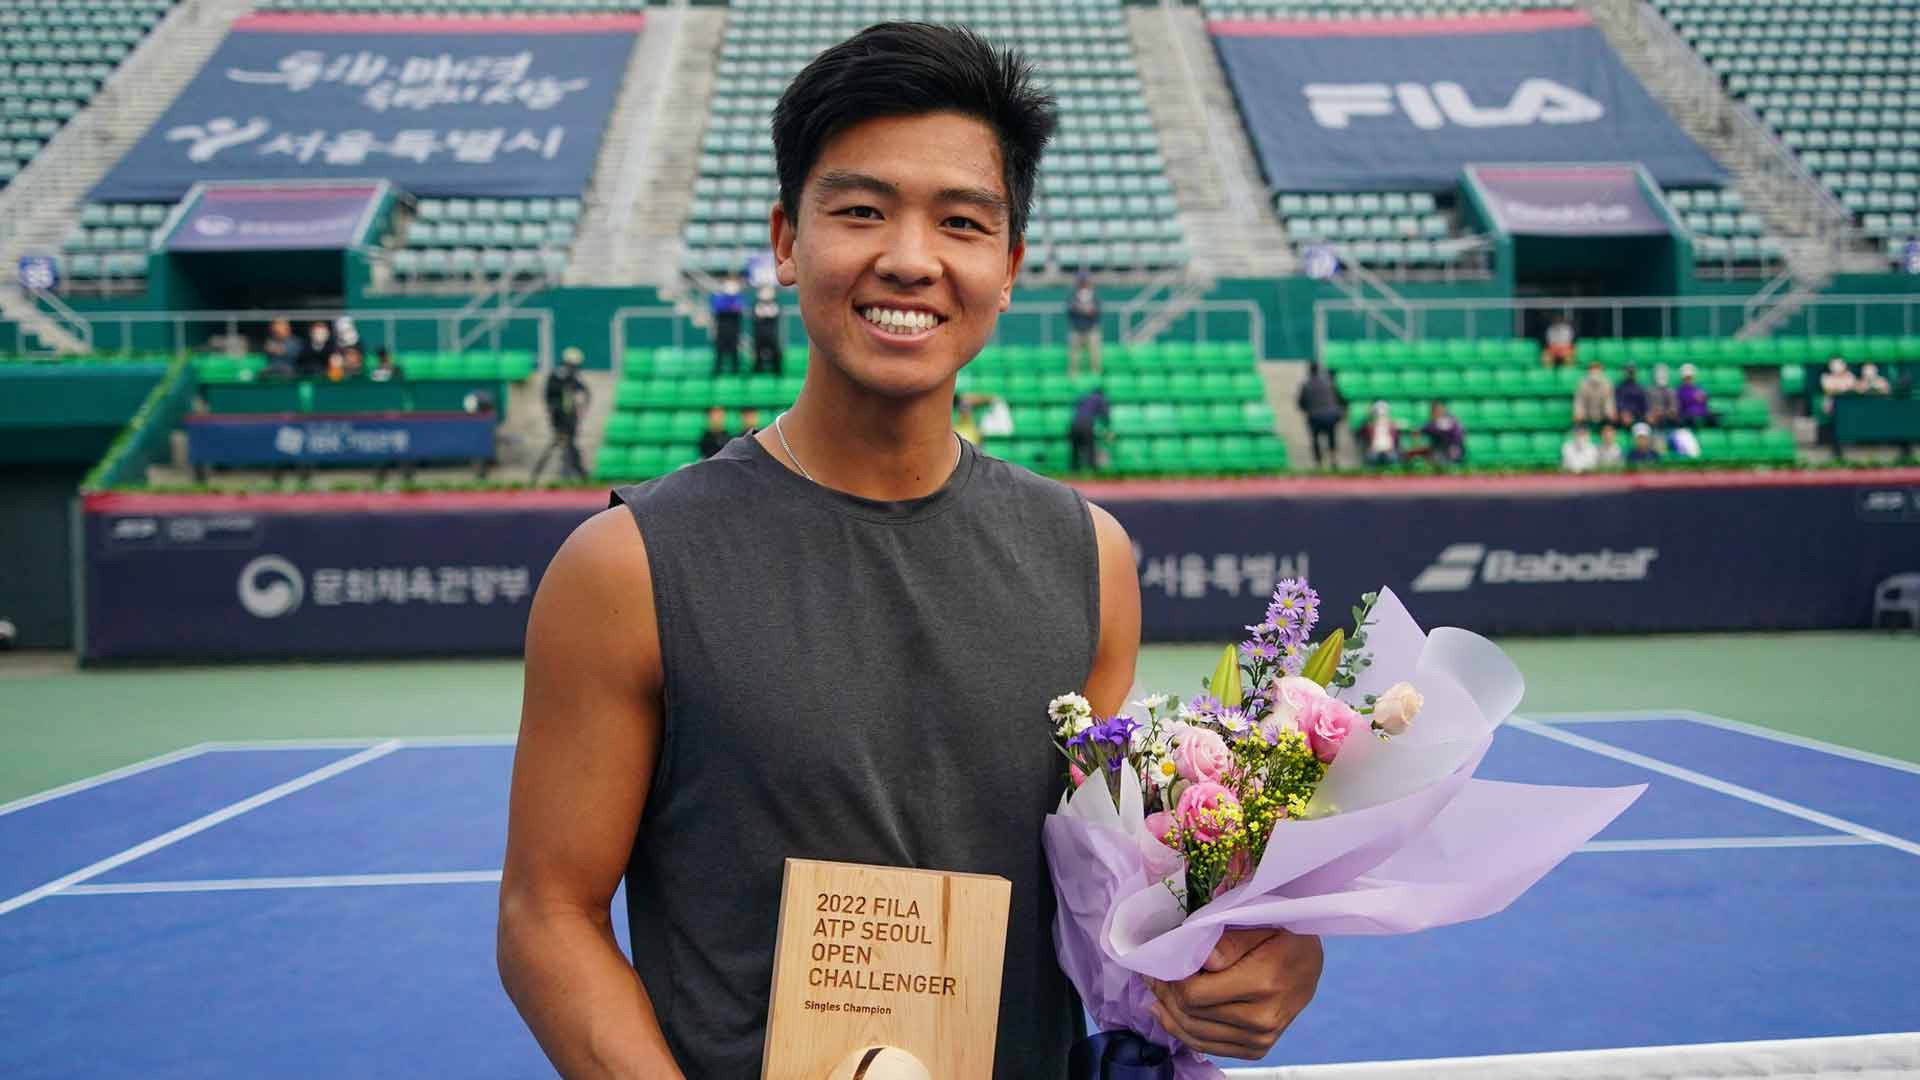 Li Tu is crowned champion at the 2022 Seoul Challenger.